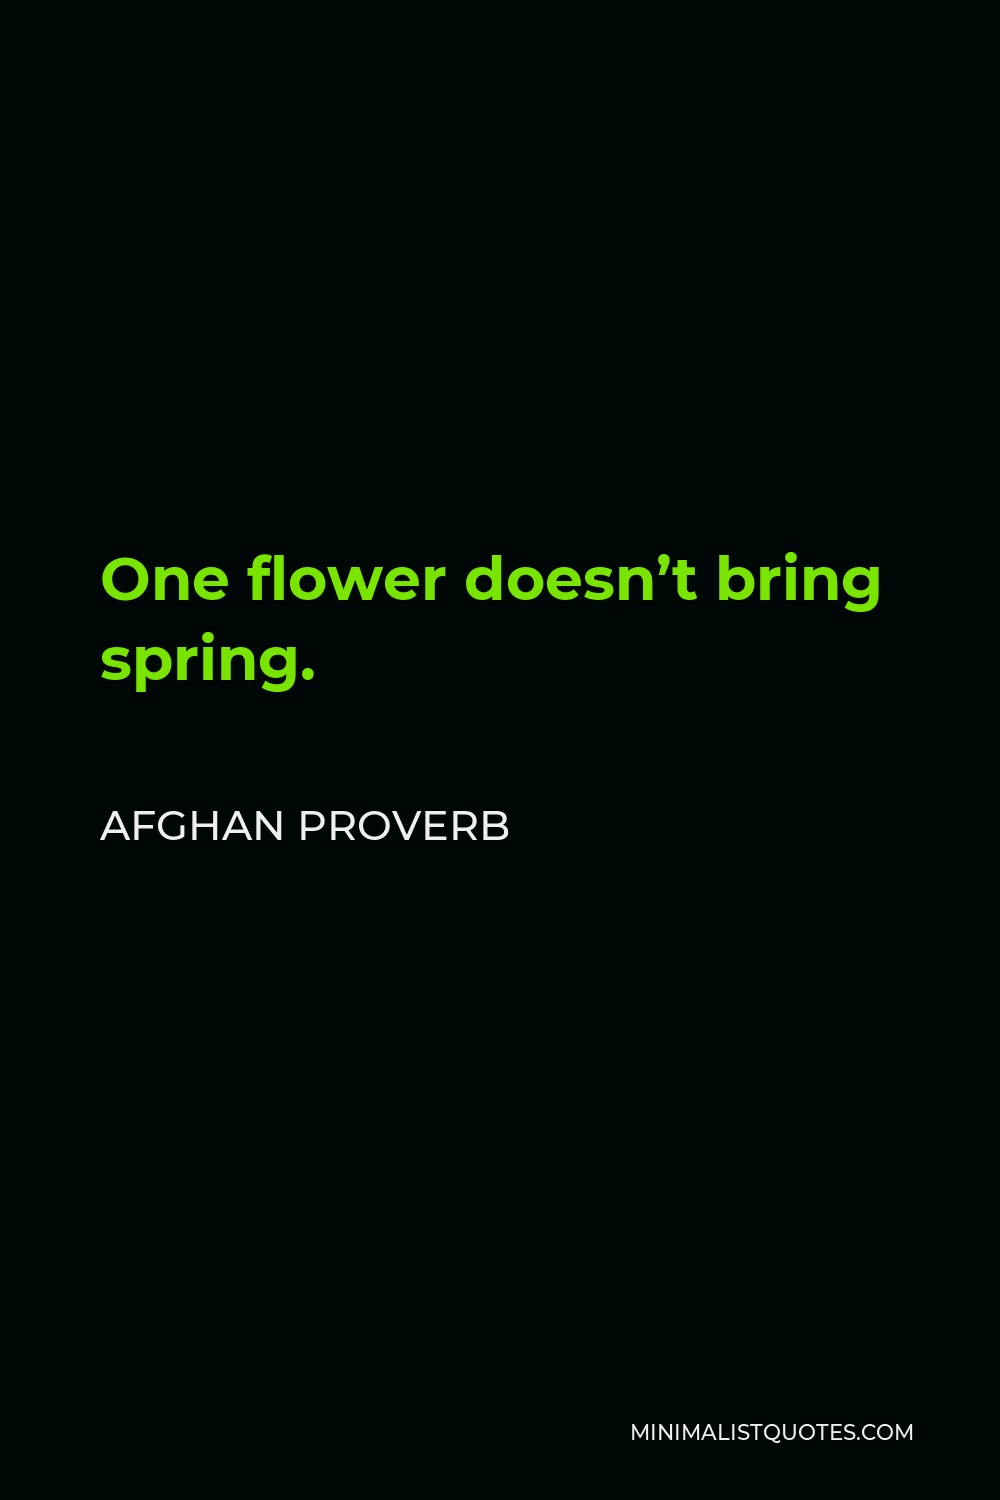 Afghan Proverb Quote - One flower doesn’t bring spring.